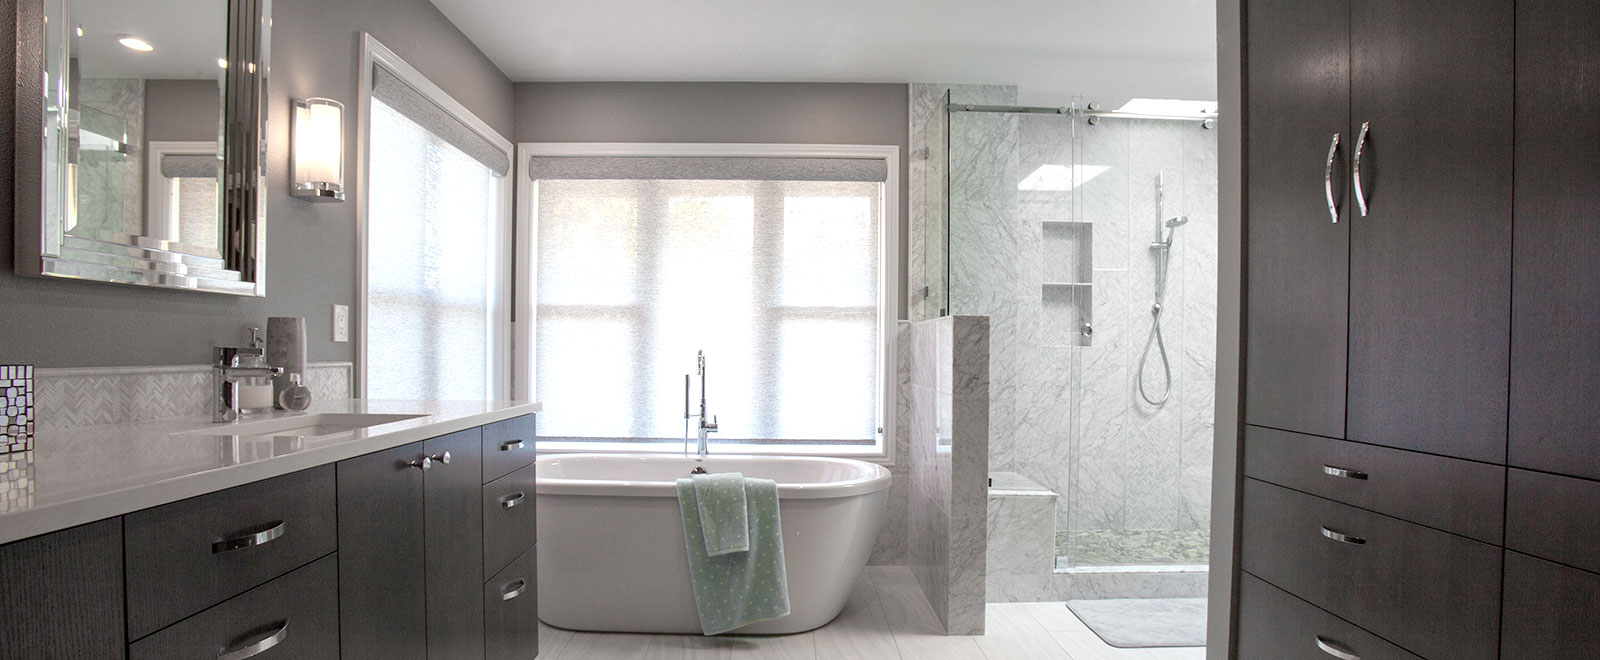 Renovated and redesigned bathroom in Portland home